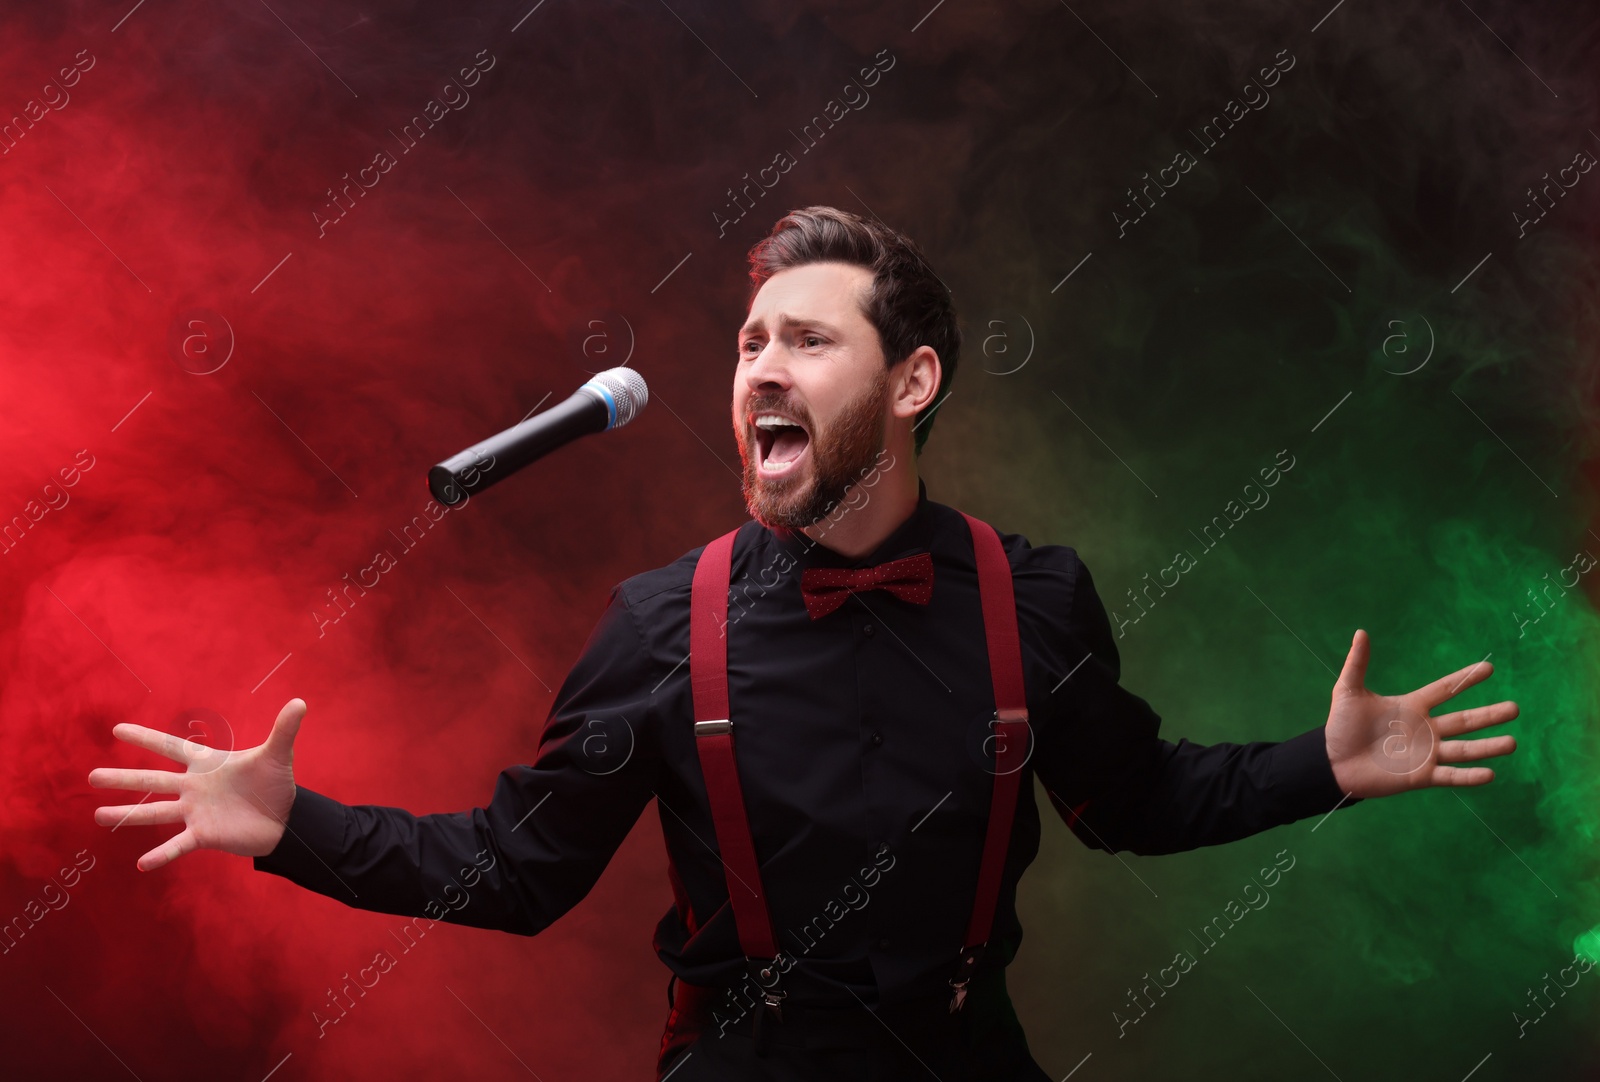 Photo of Emotional singer performing in red and green lights